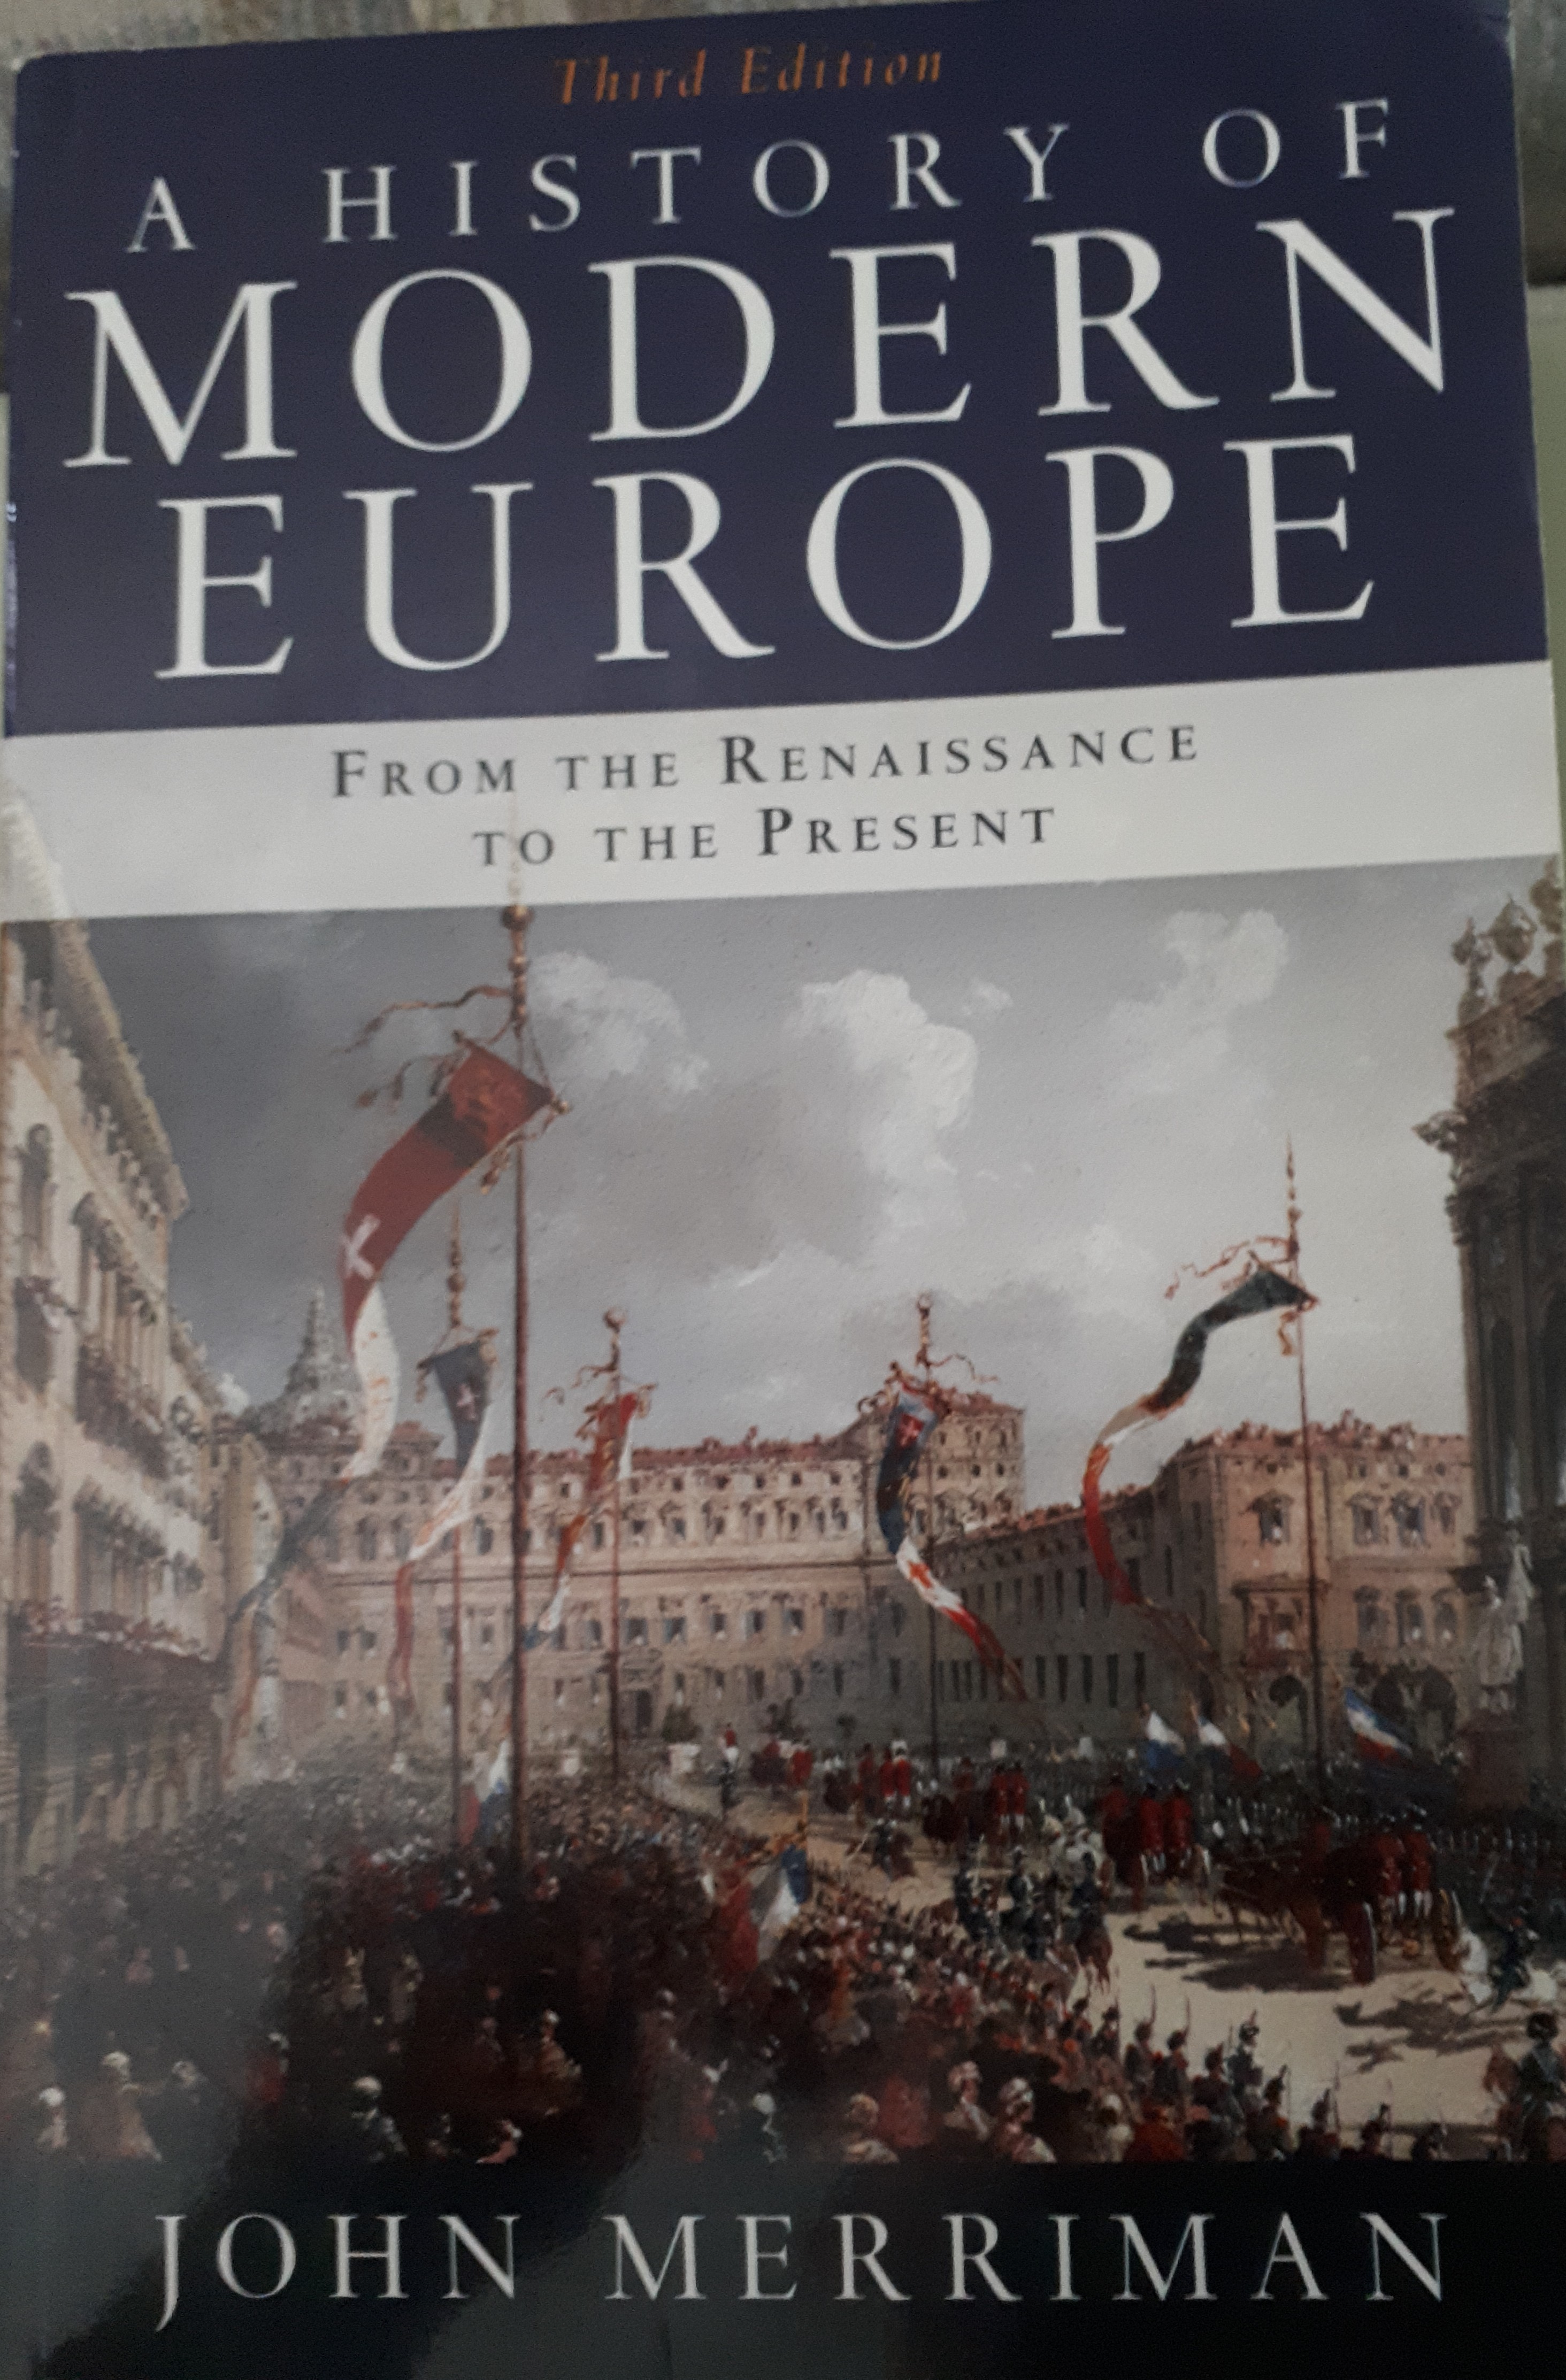 A history of modern europe